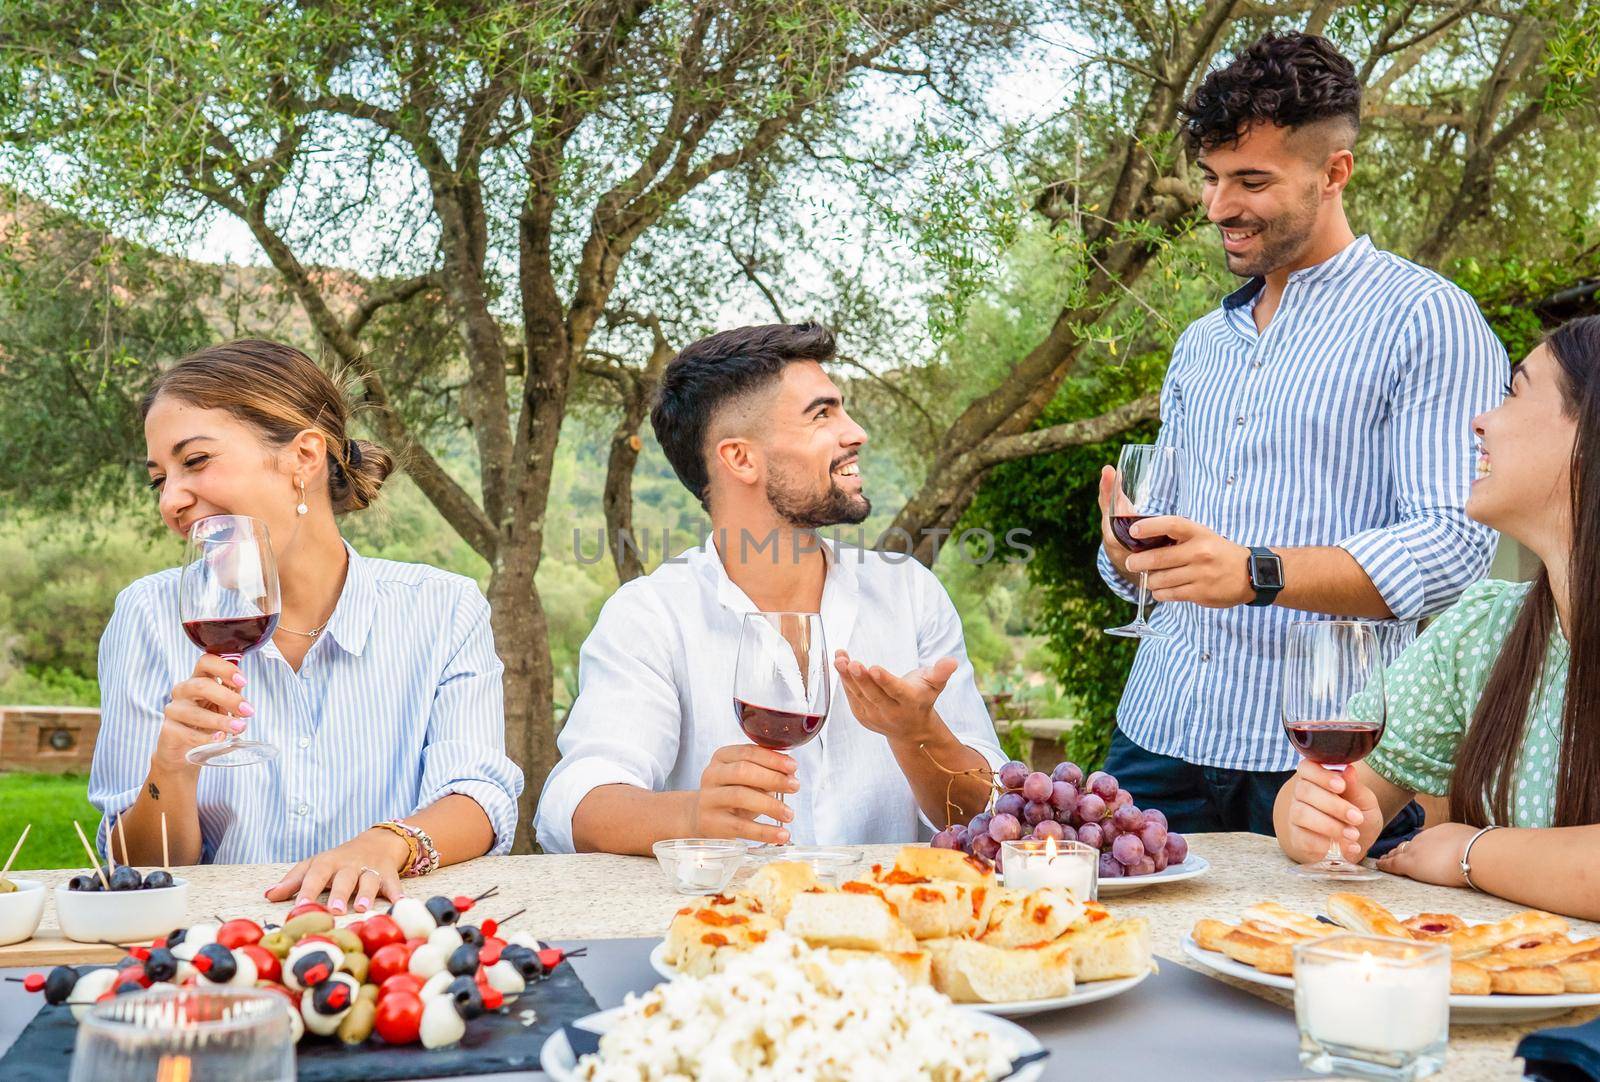 Typical italian celebration for grape harvest in country size house. Group of young friends gathering at table laden with snacks, pizza, tomatoes and mozzarella skewers holding glasses of red wine